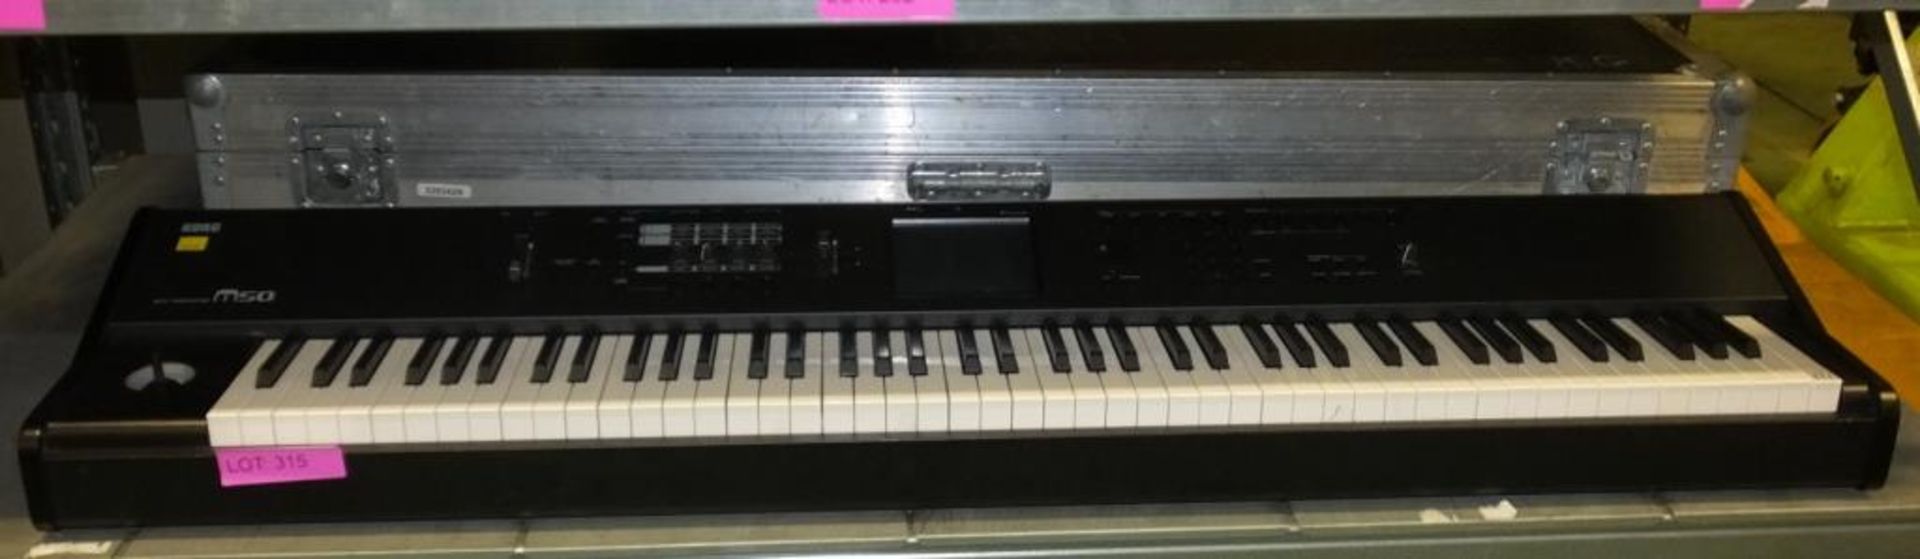 KORG M50 Electric Keyboard with Case